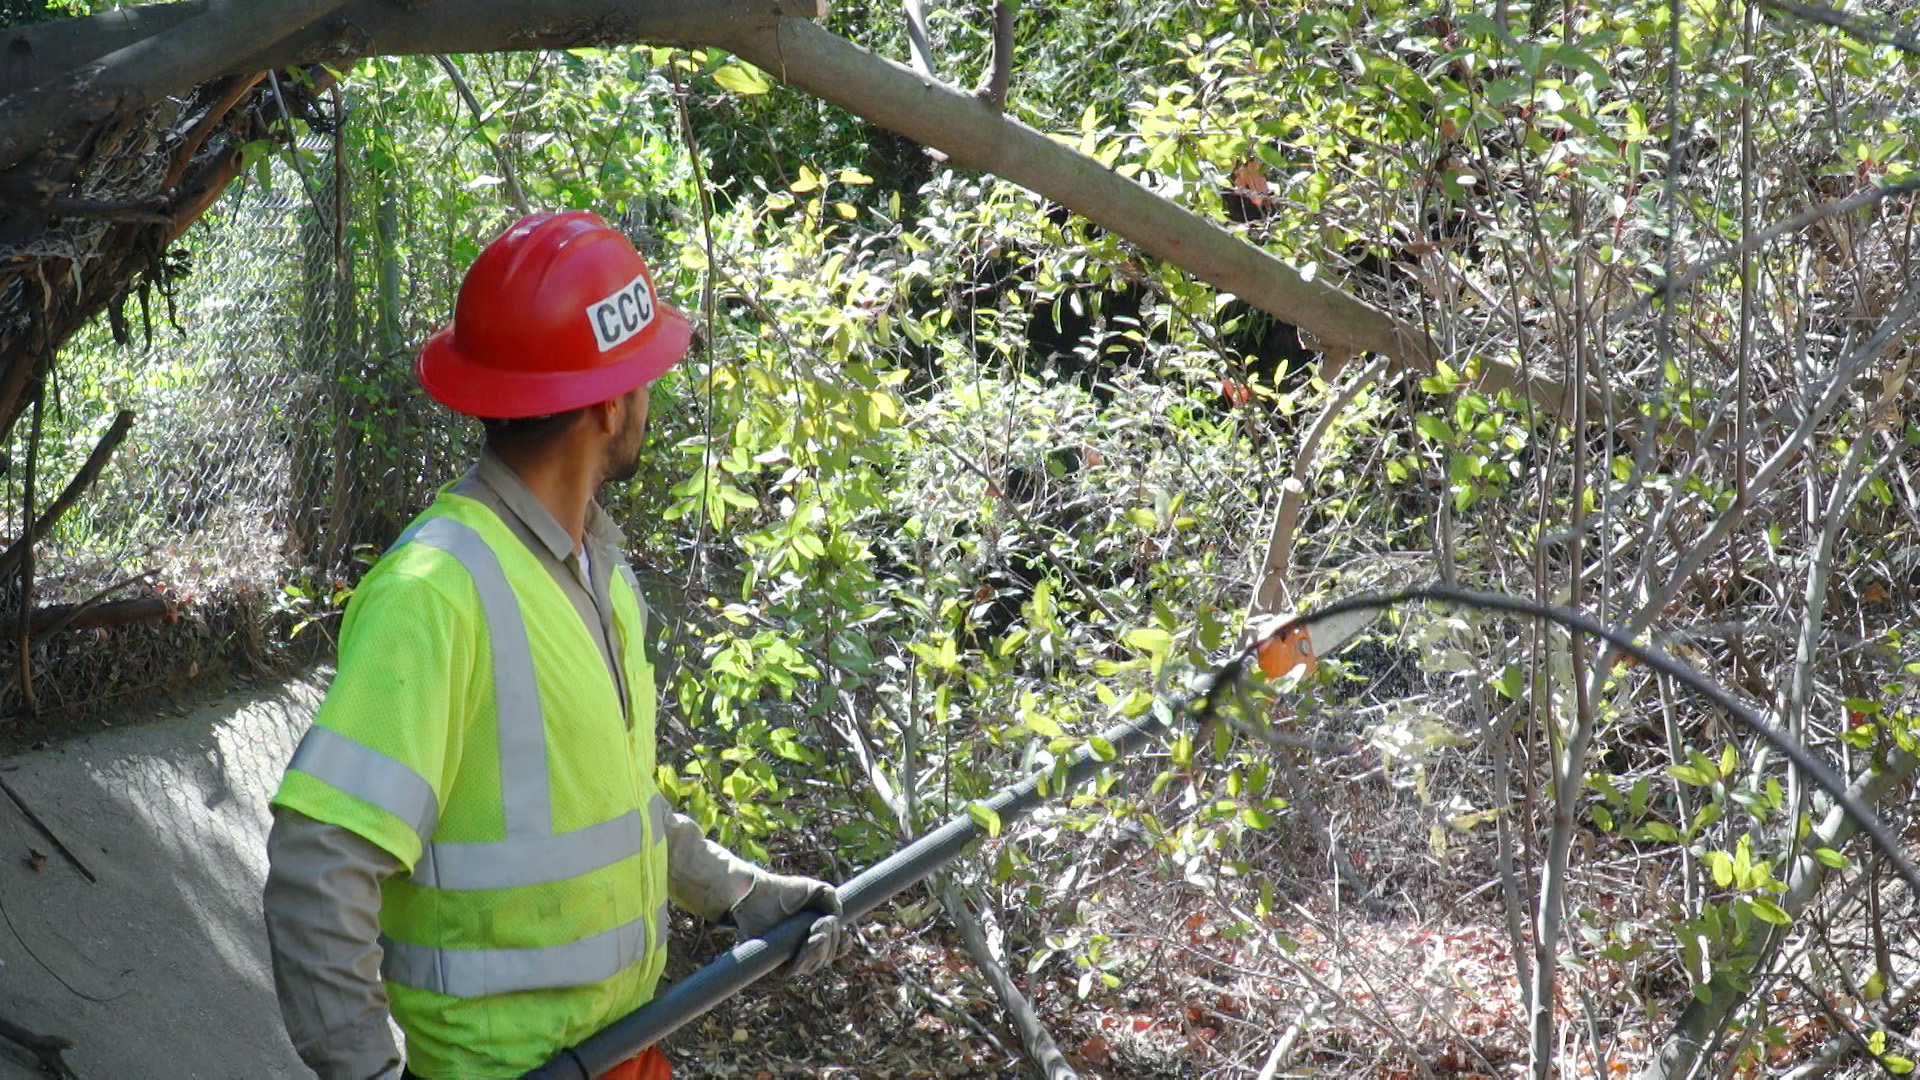 A Corpsmember in safety equipment in left foreground uses a pole saw to cut tree branches in the background.